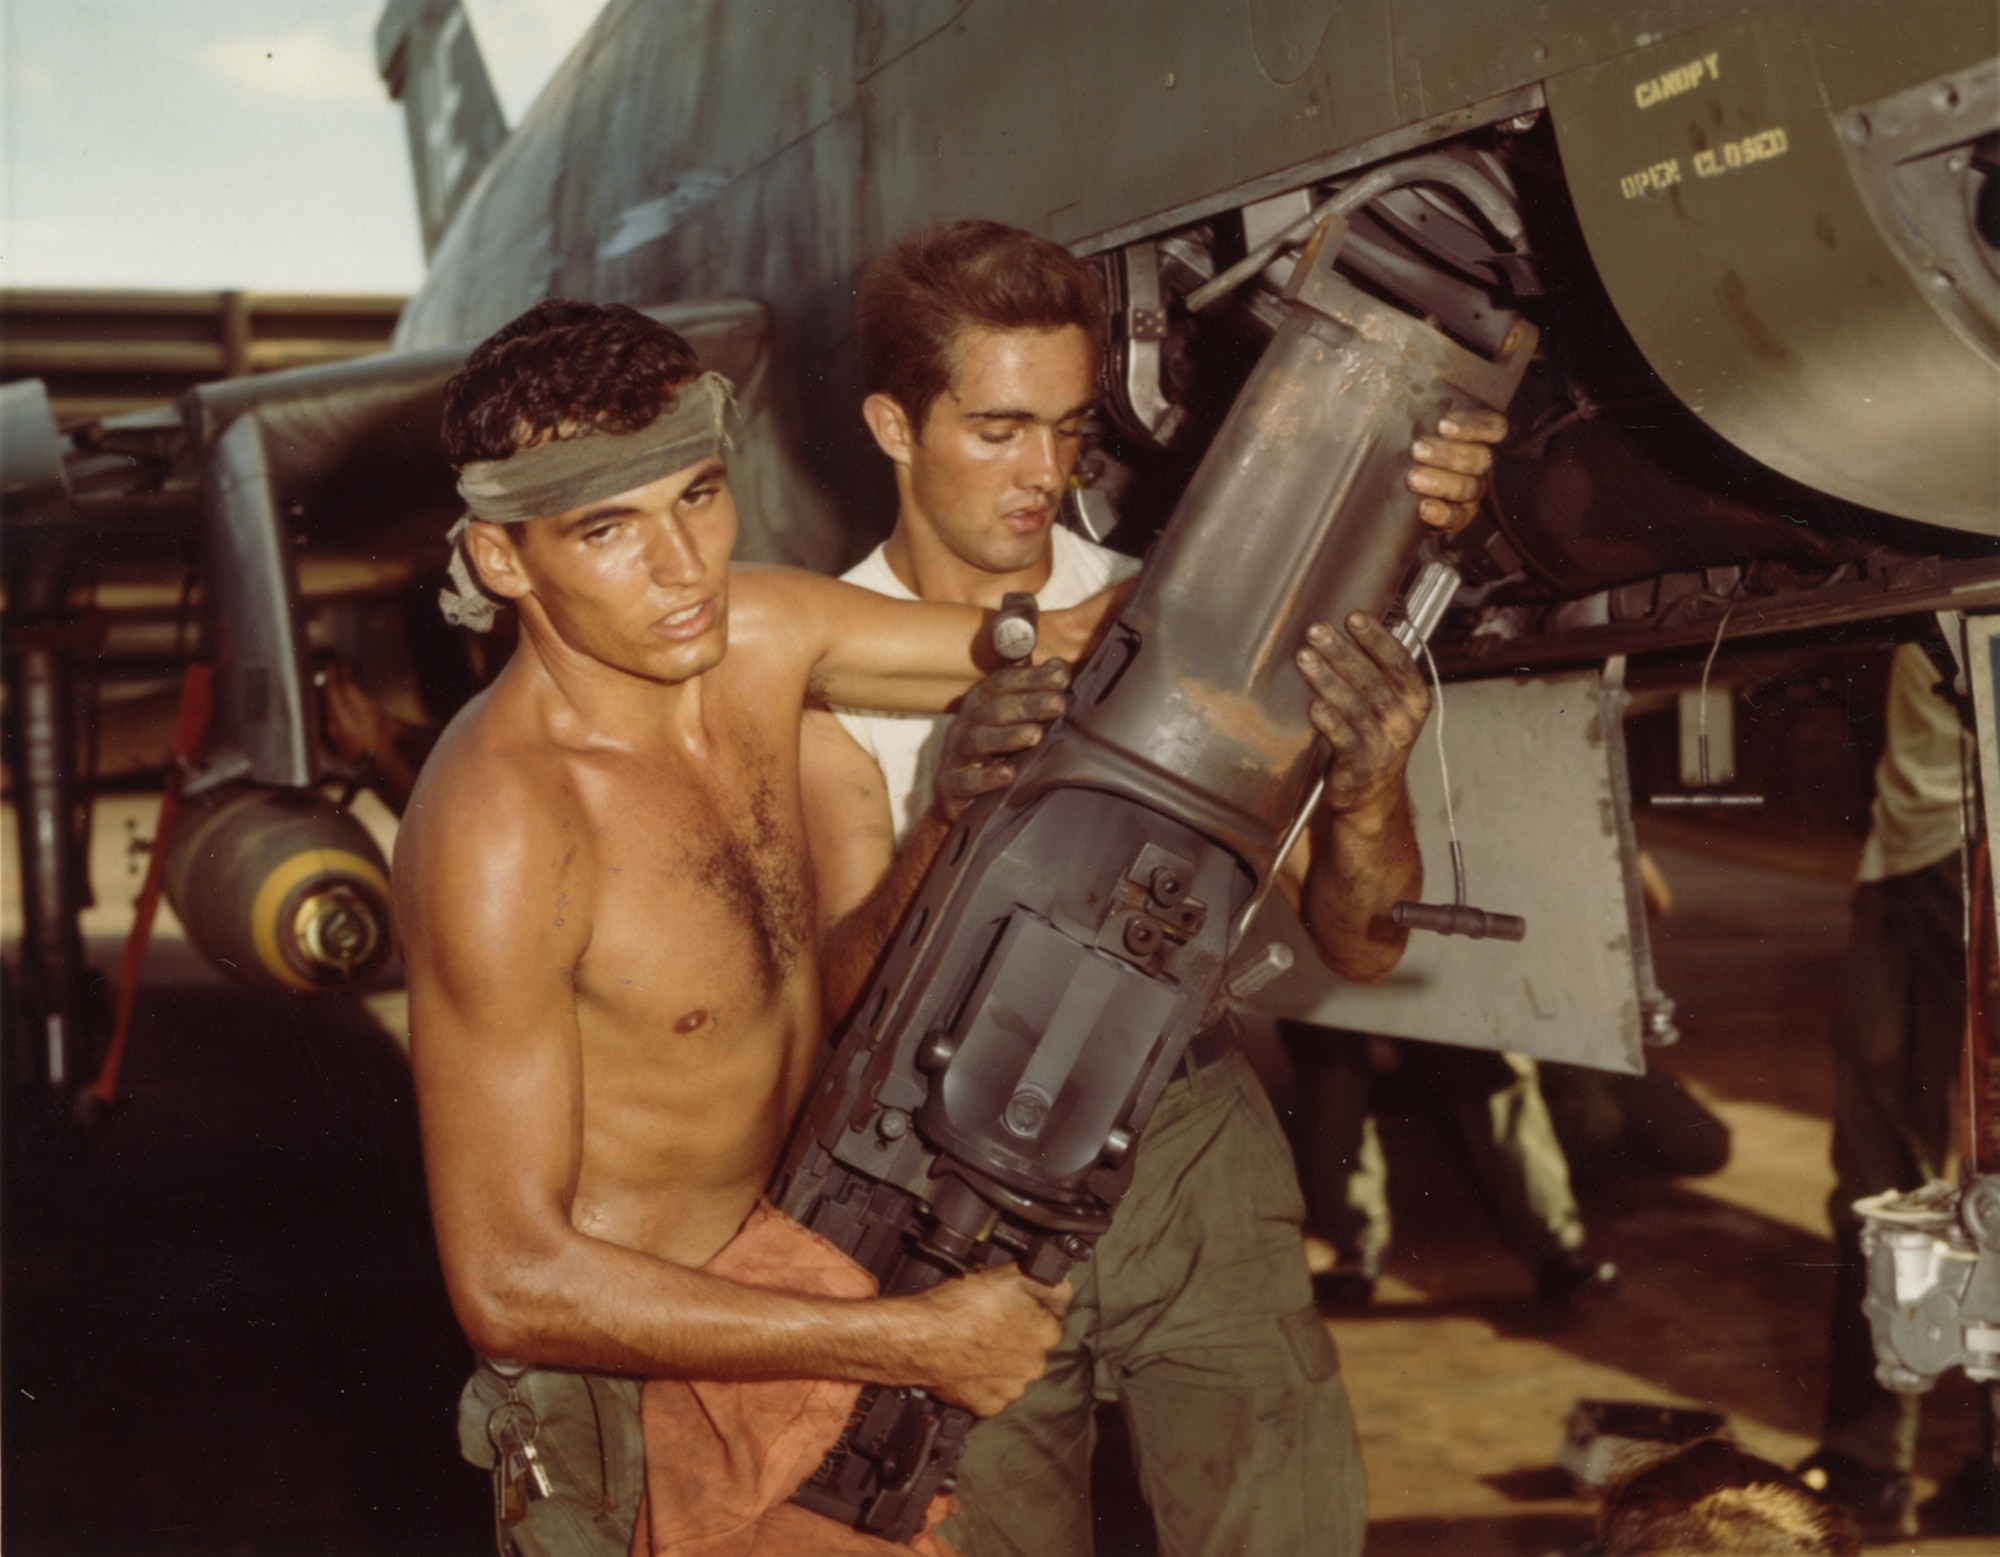 On the hot flight line at Phu Cat Air Base, Airmen 2nd Class Francis Branch (left) and John Sellung remove a 20mm cannon from an F-100 in October 1967. (U.S. Air Force photo)